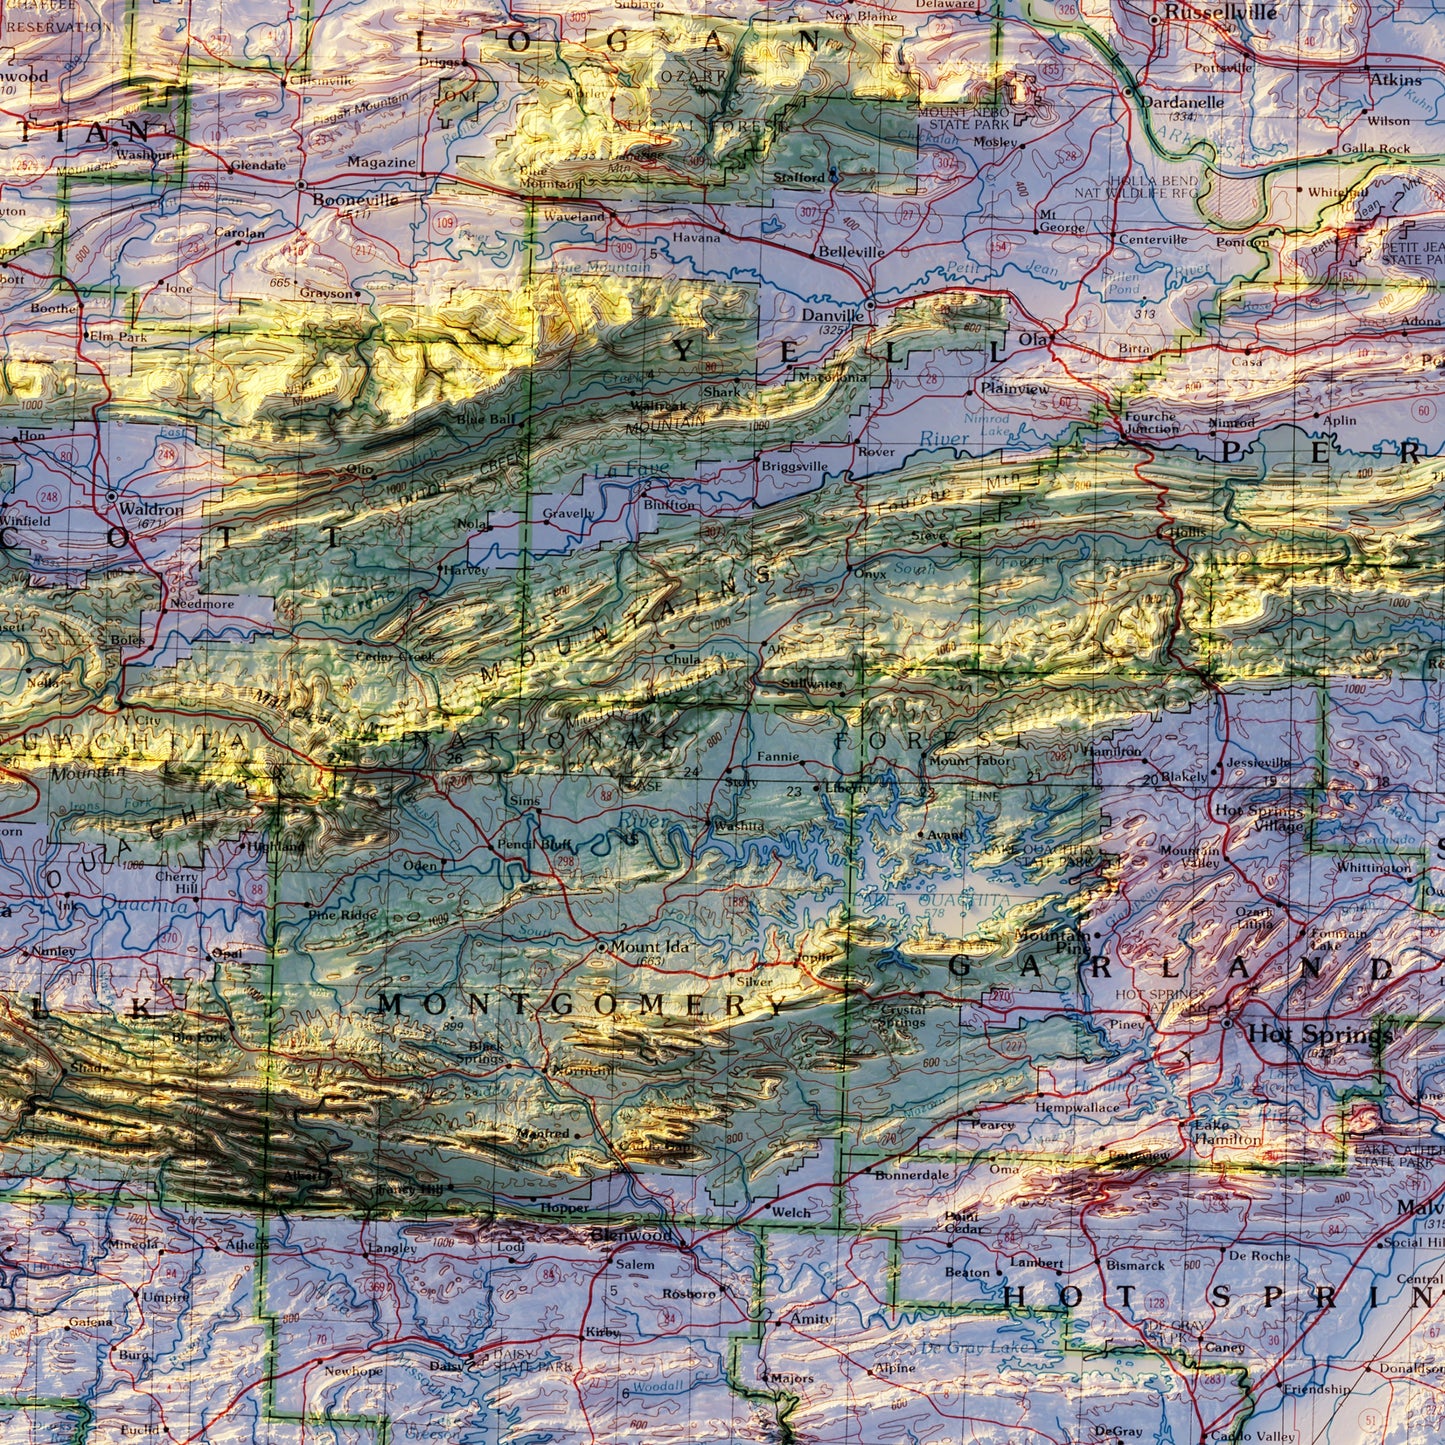 Arkansas 1990 Shaded Relief Map